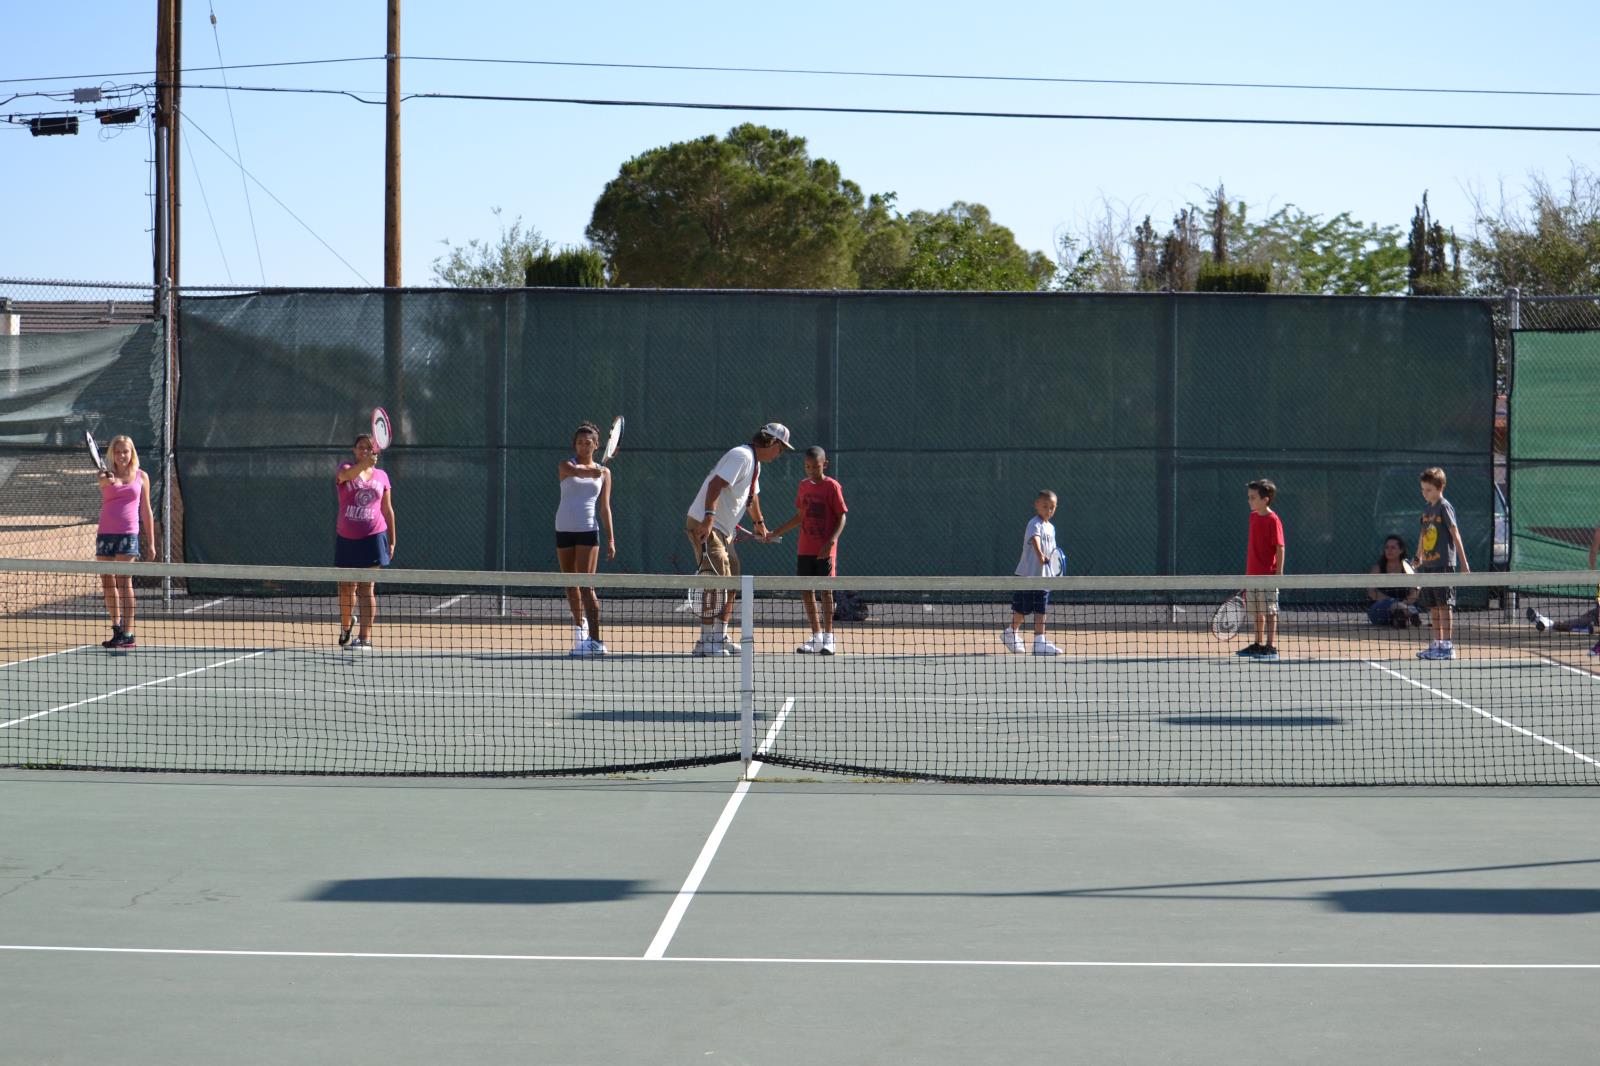 Bill M. teaches tennis lessons in Apple Valley, CA